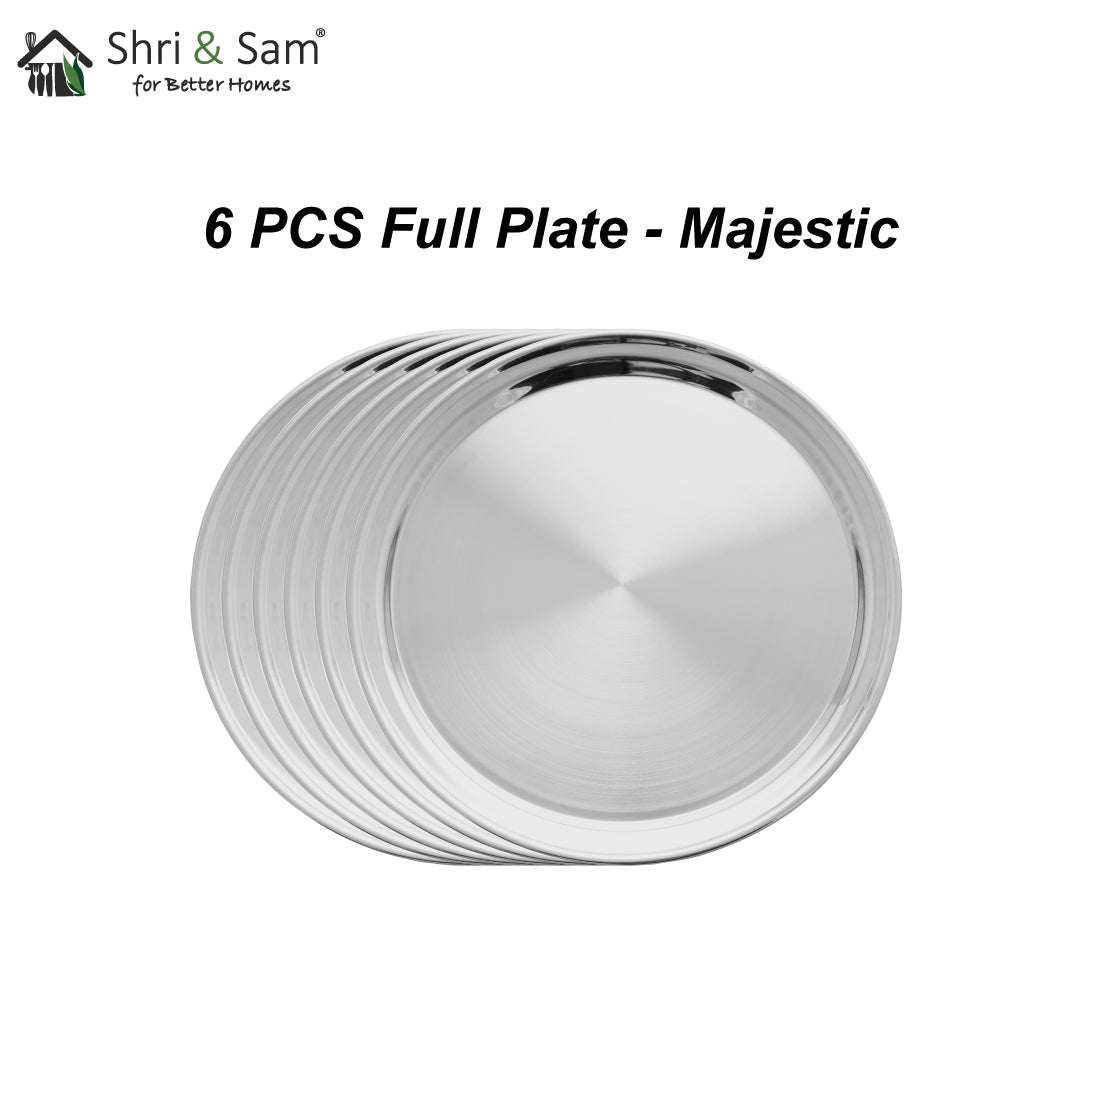 Stainless Steel 6 PCS Full Plate Majestic